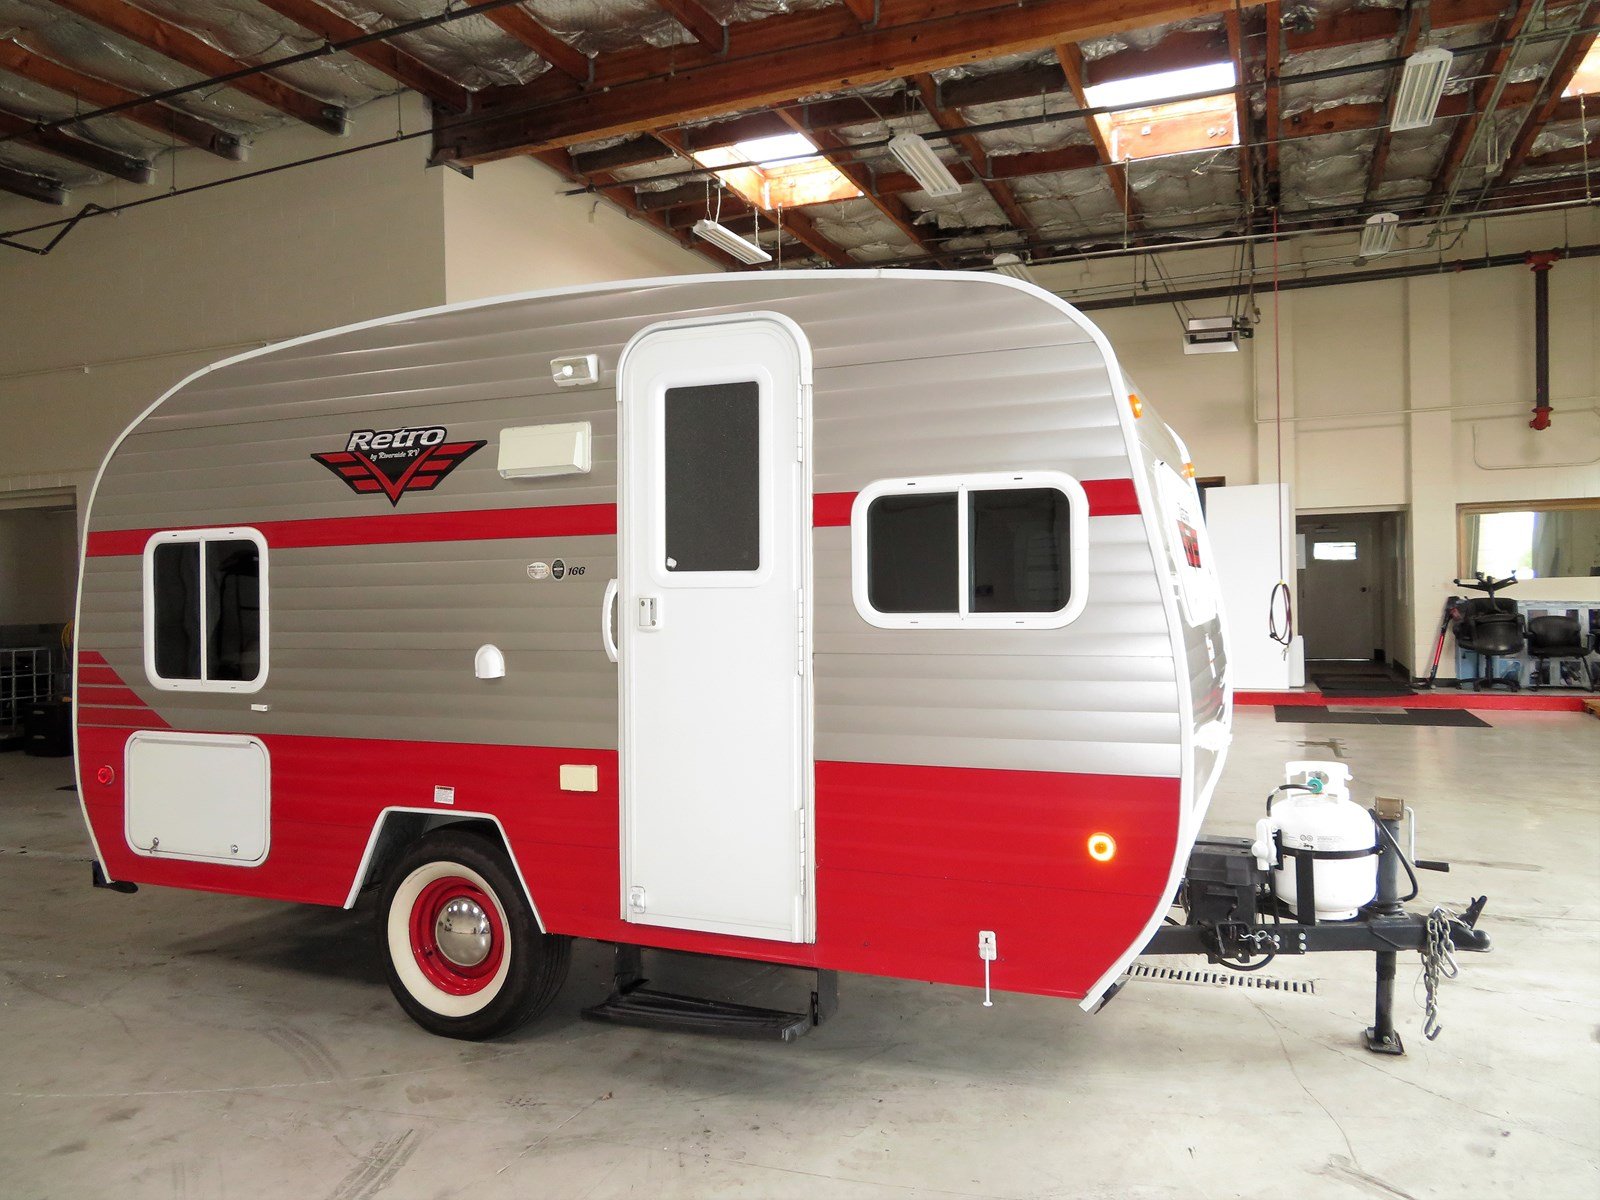 lightest travel trailers on the market